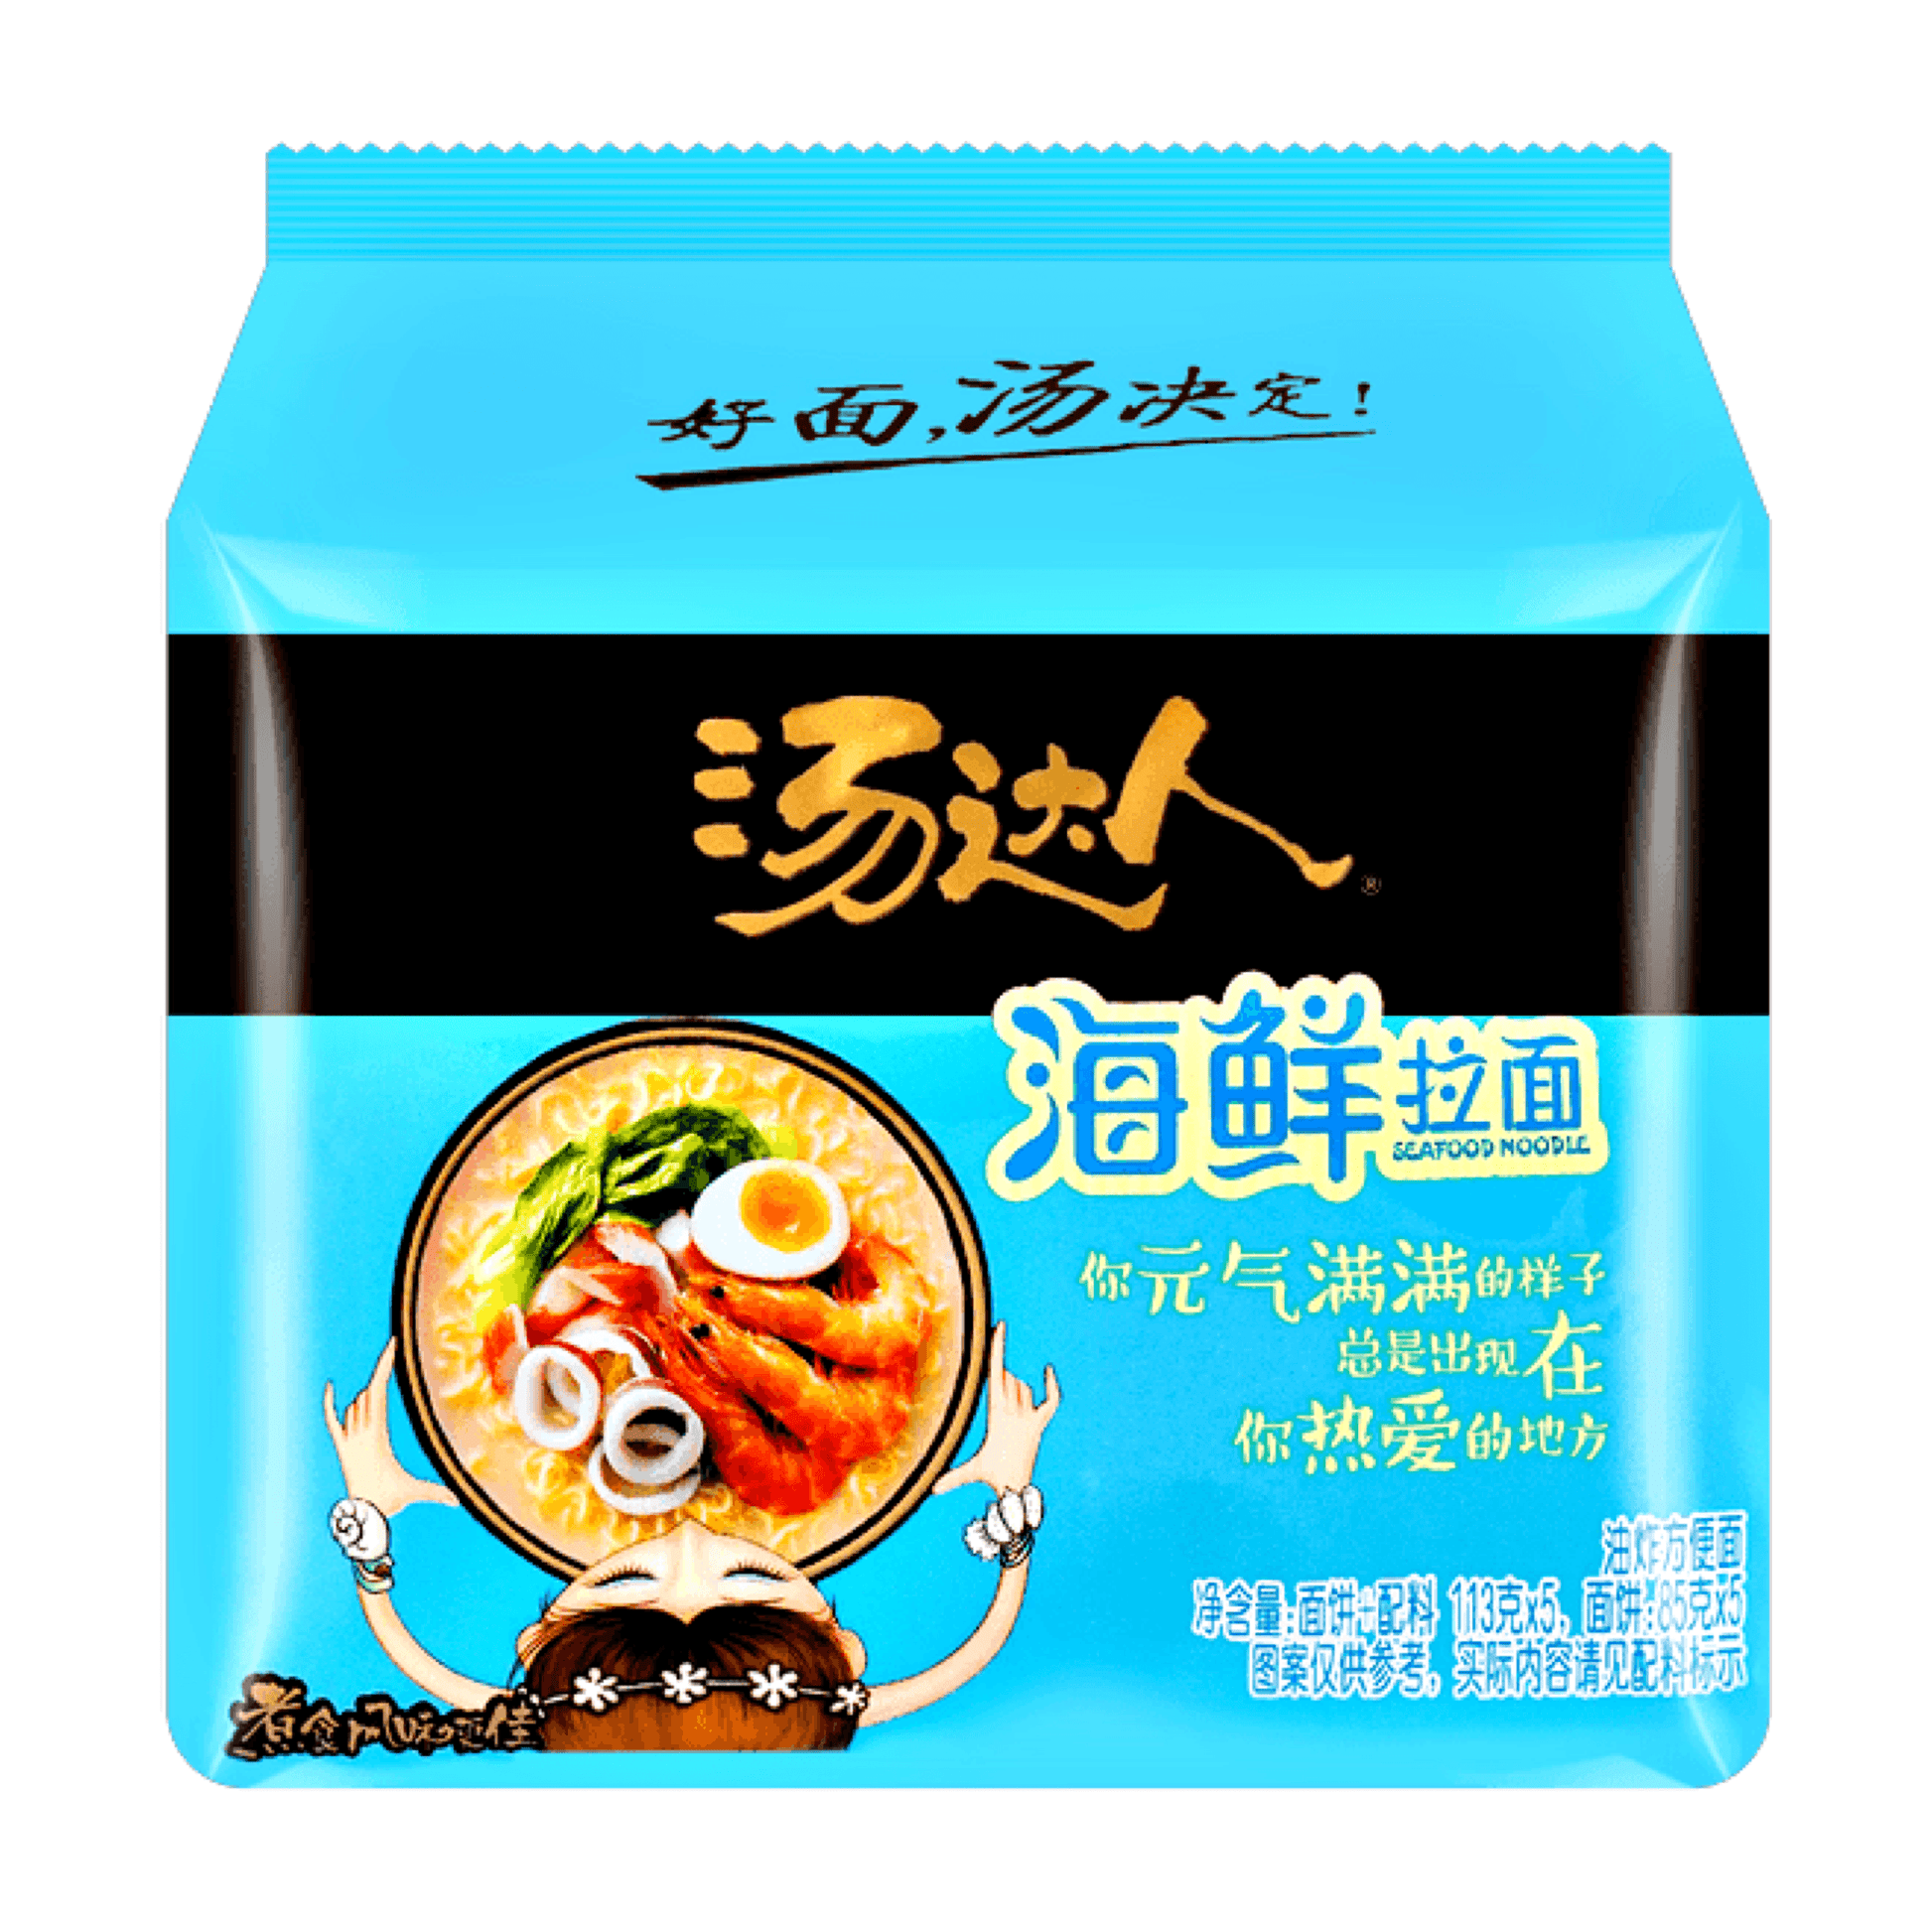 Tangdaren Seafood Instant Noodle 5x113g - The Snacks Box - Asian Snacks Store - The Snacks Box - Korean Snack - Japanese Snack